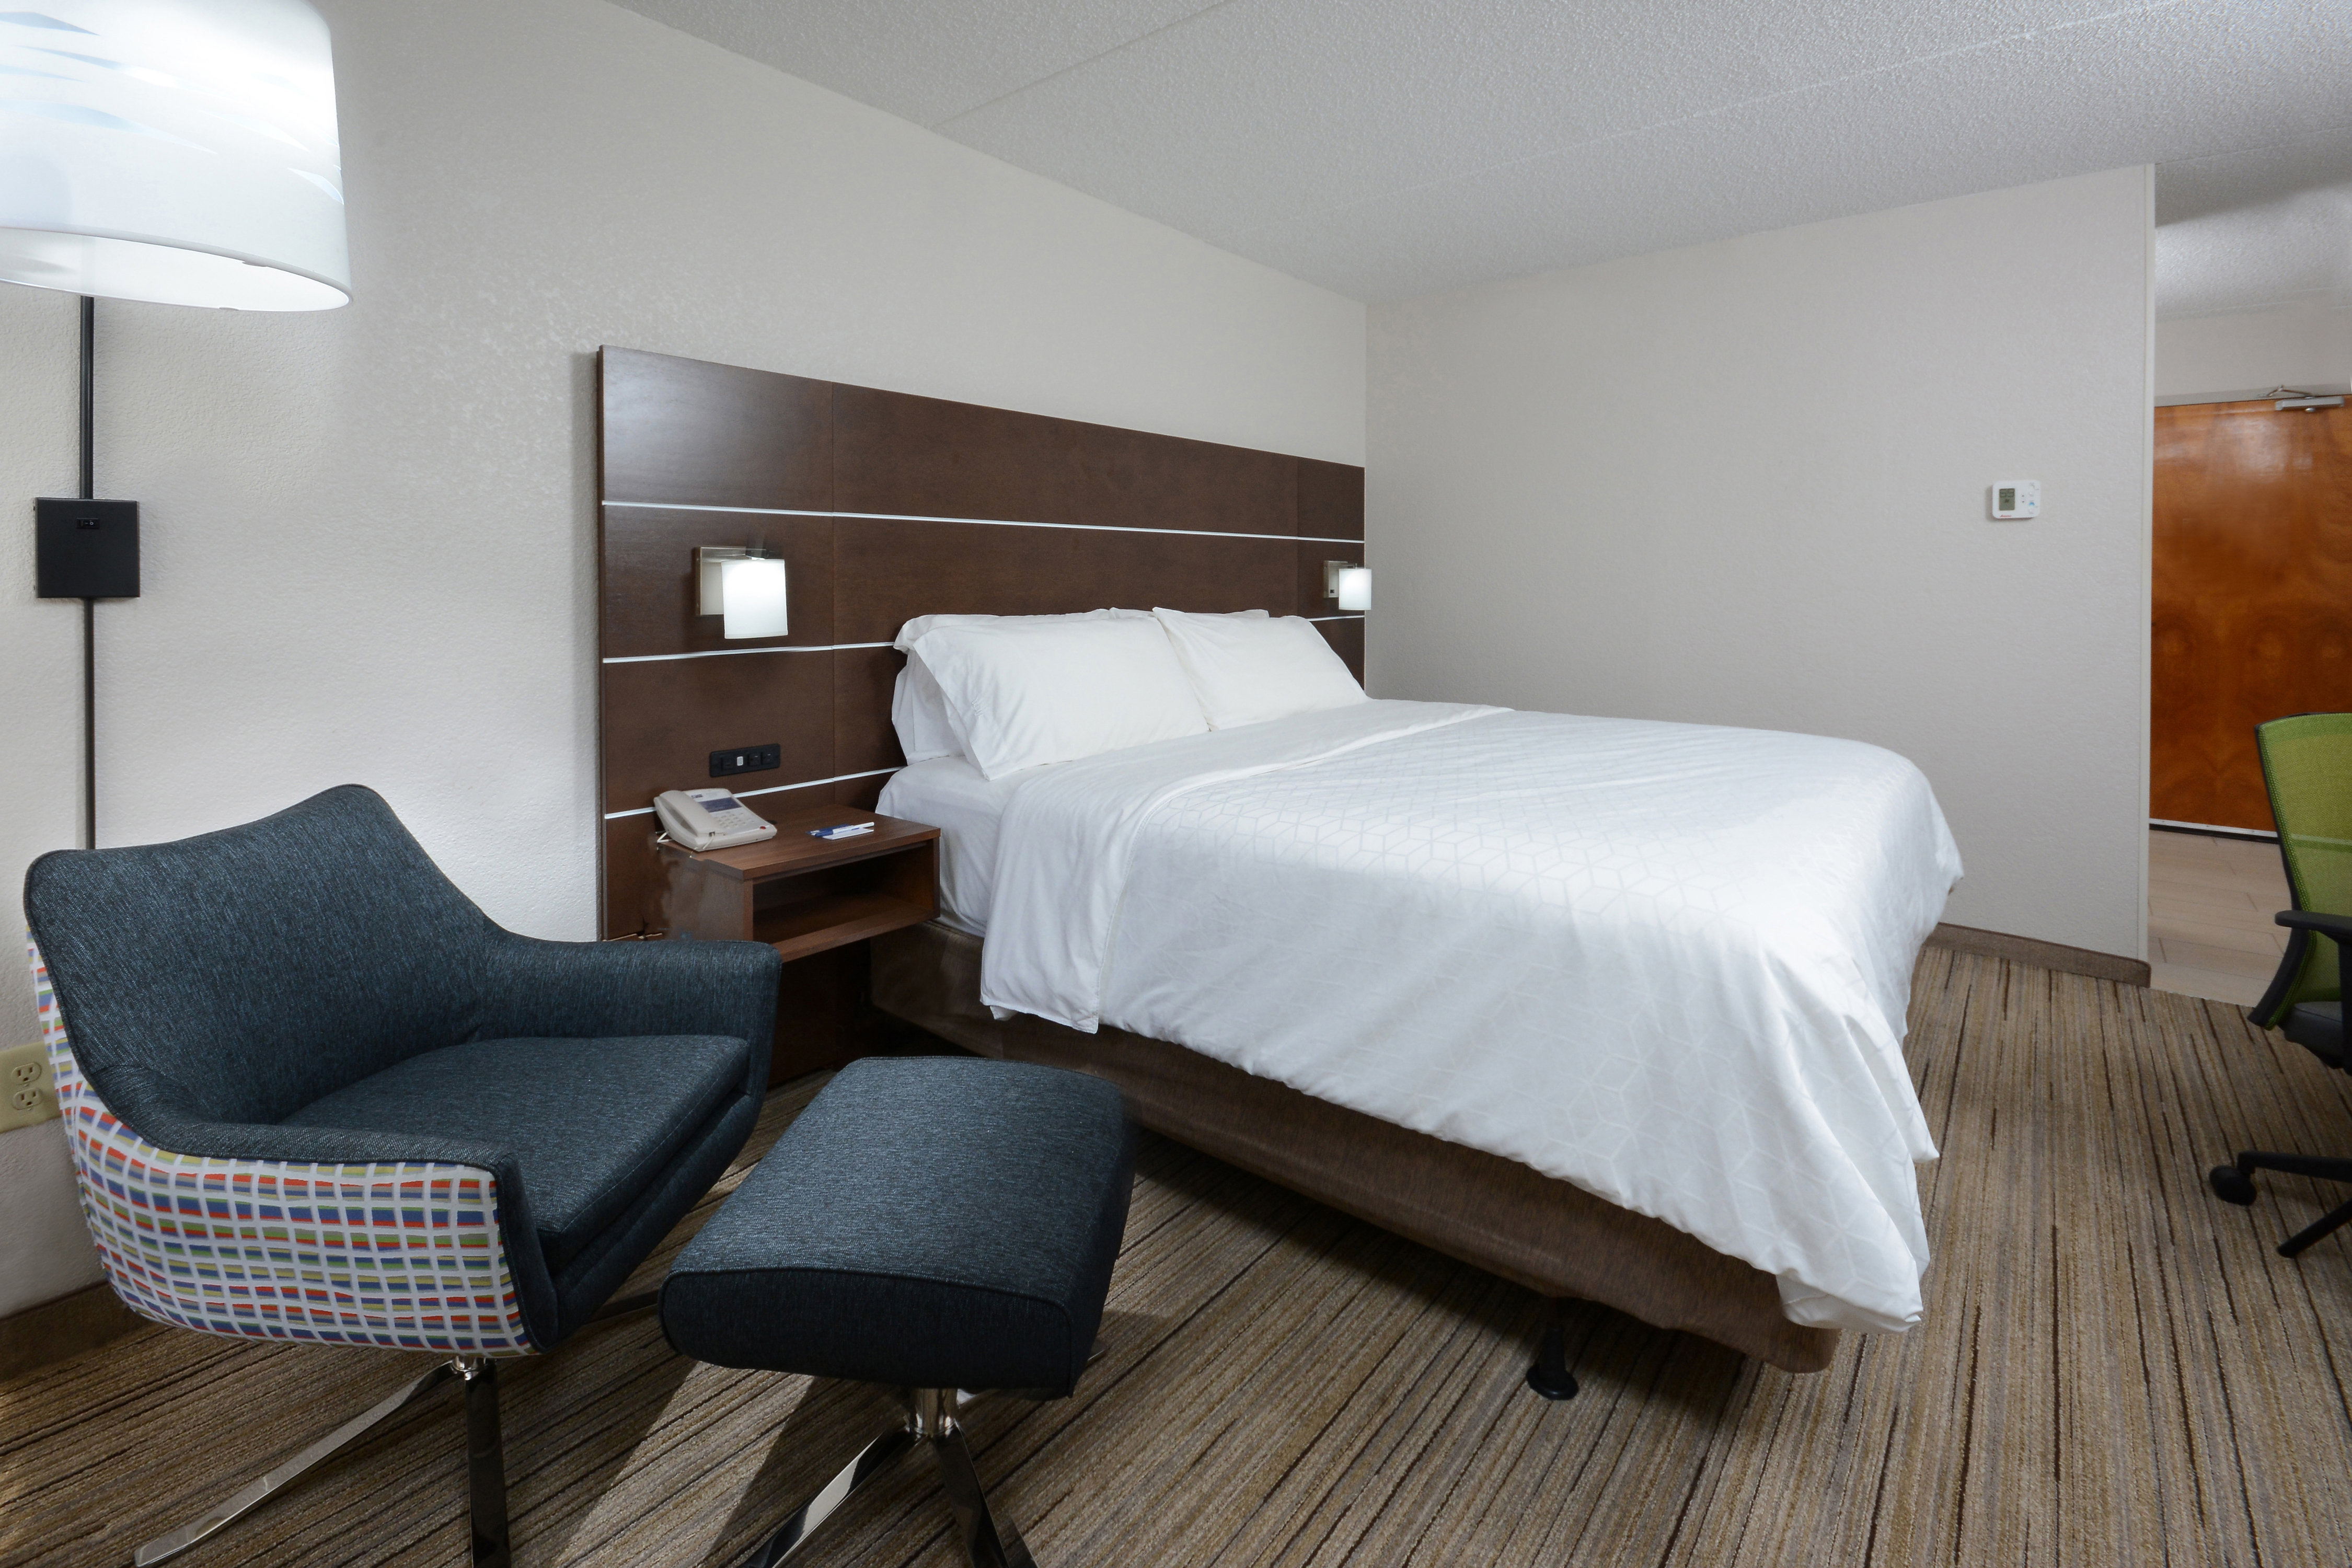 Our King rooms feature a comfortable, modern chair to relax in.